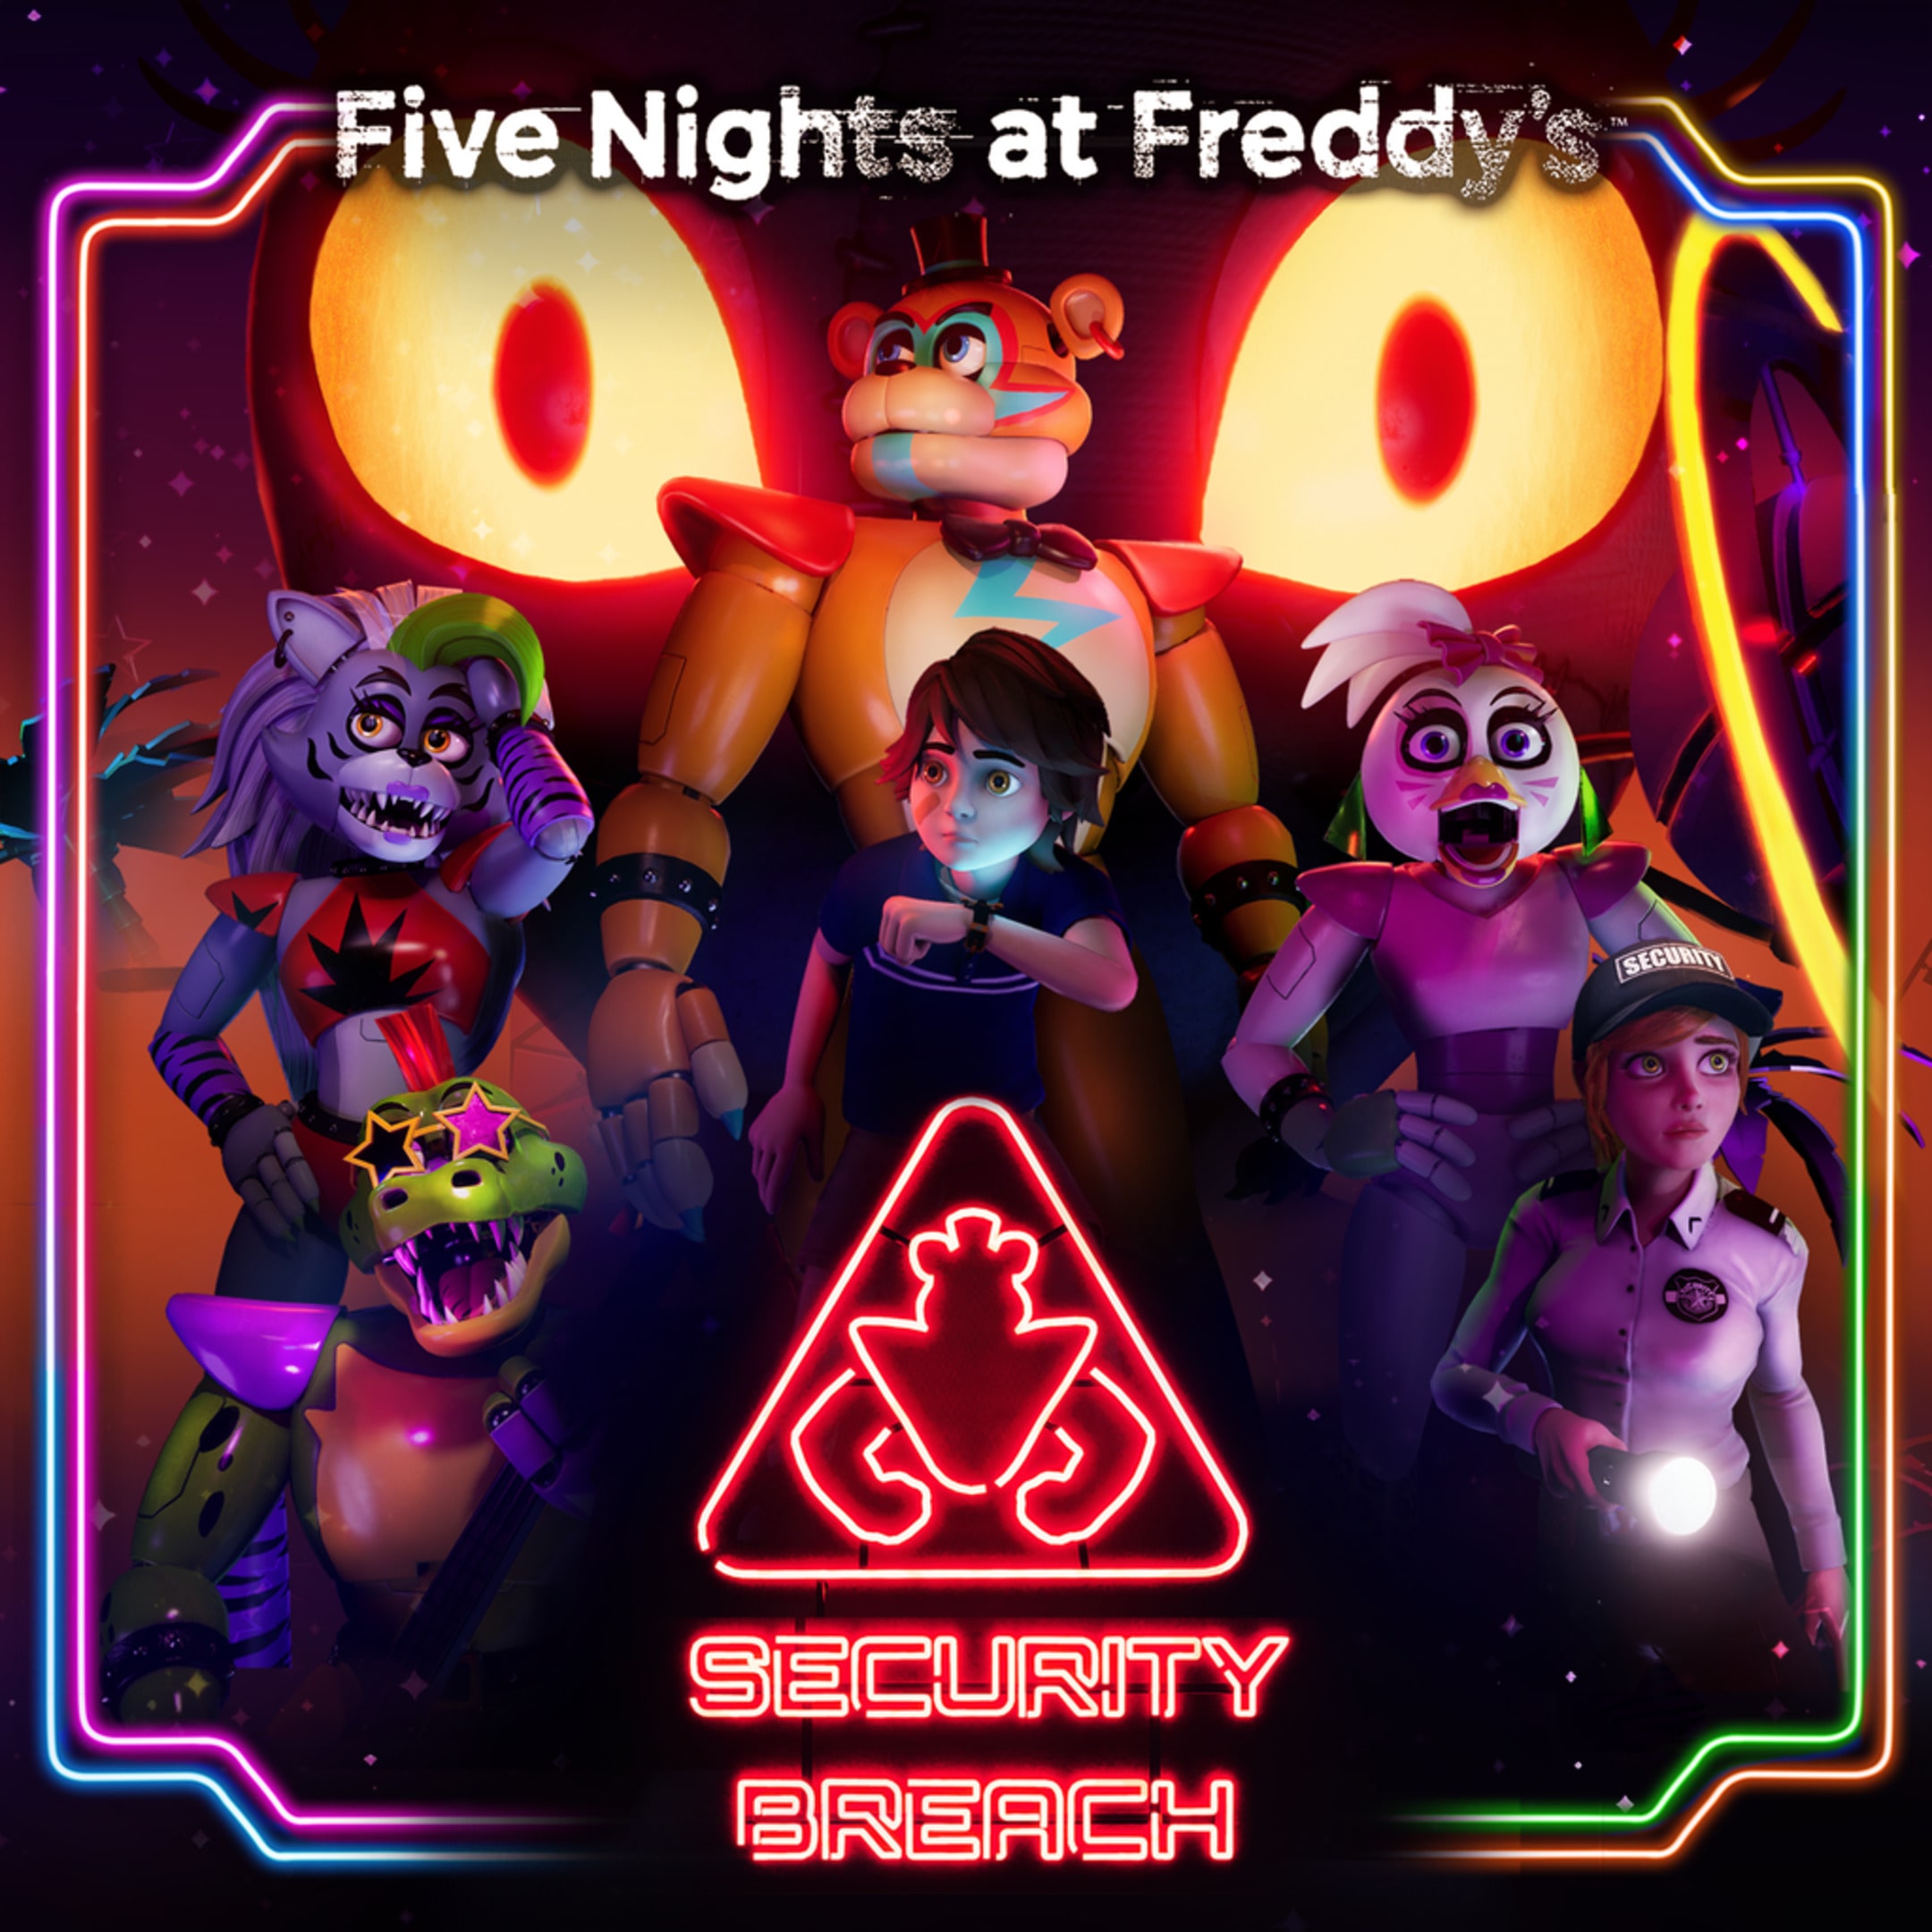 [CT] Five Nights at Freddy's: Security Breach